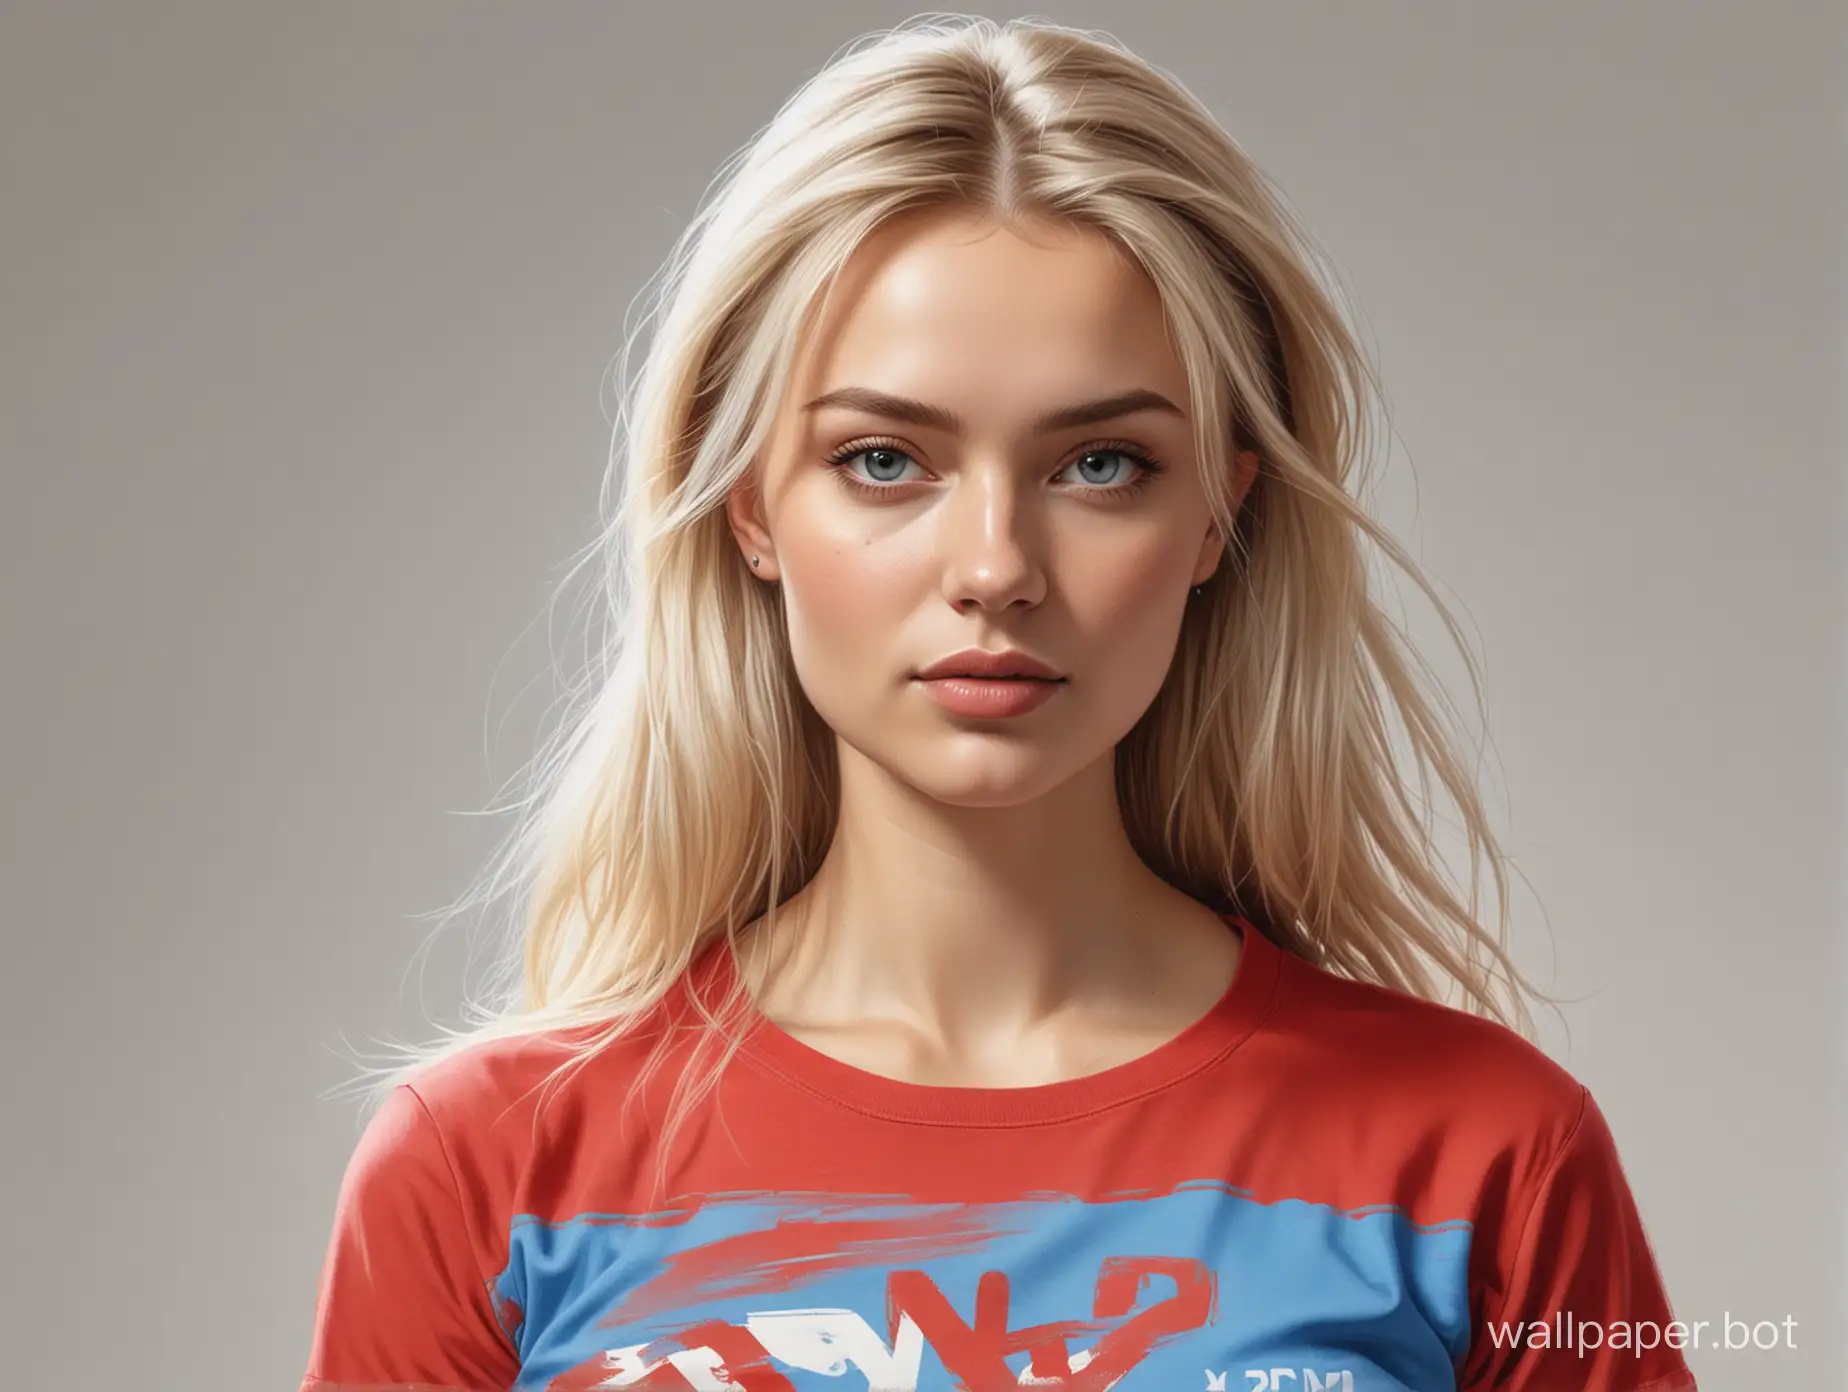 Sketch of Valeria Prigozhina, 25 years old, light hair, 6th breast size, narrow waist, in a red-and-blue T-shirt, white background, high realism. Style Boris Vallejo, portrait in half-turn.